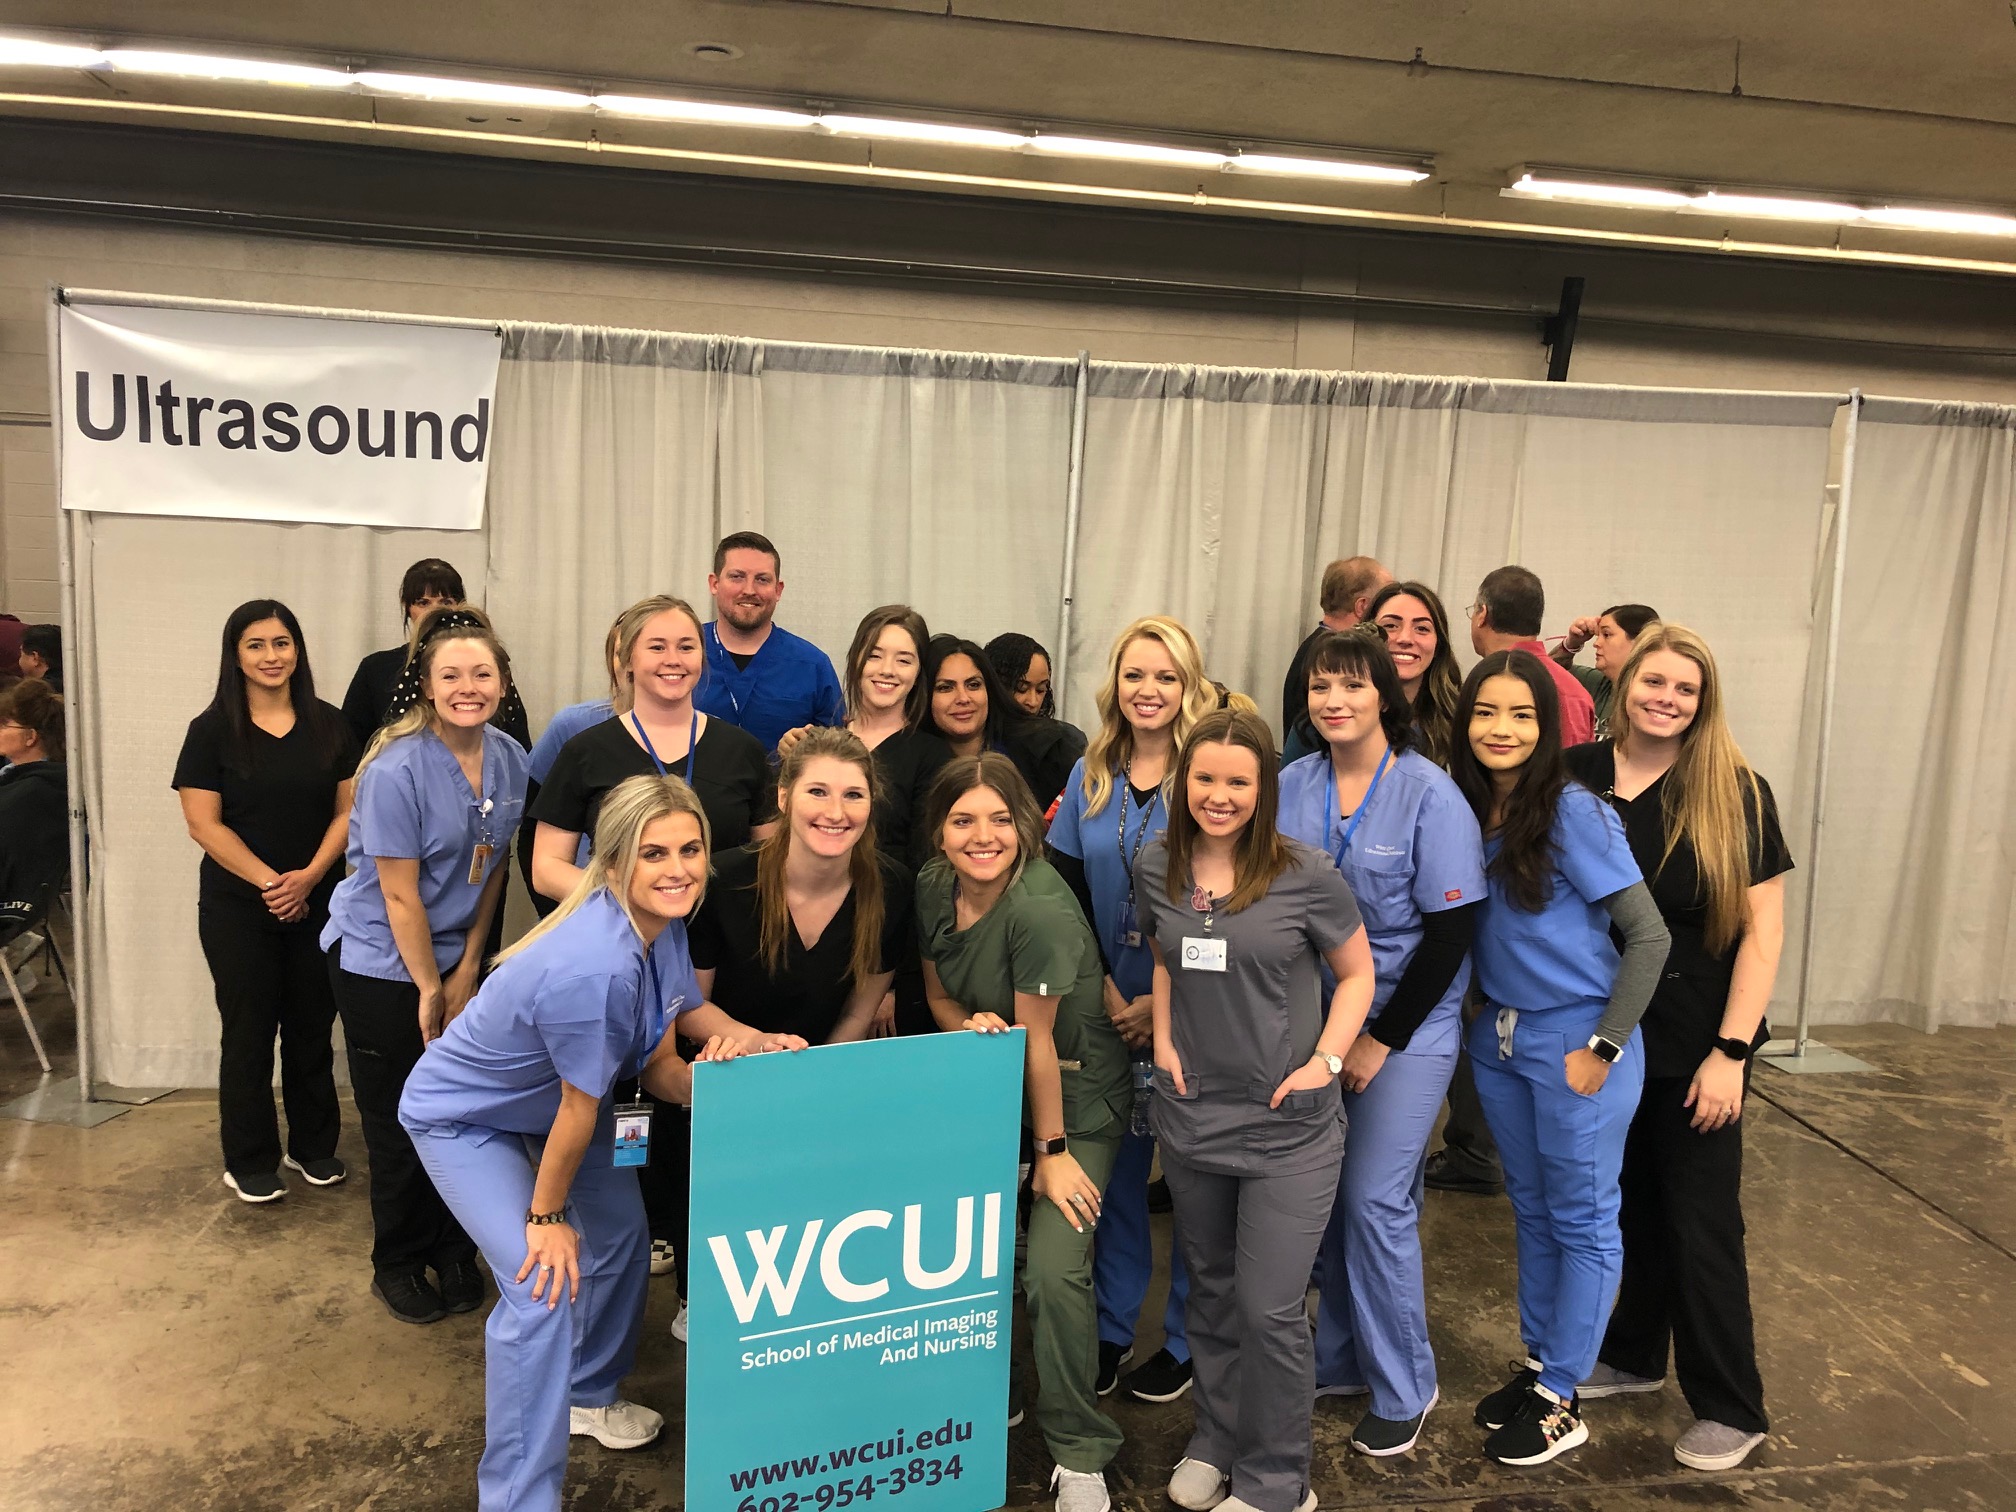 WCUI Student and Staff smiling in a group photo after the MC StandDown